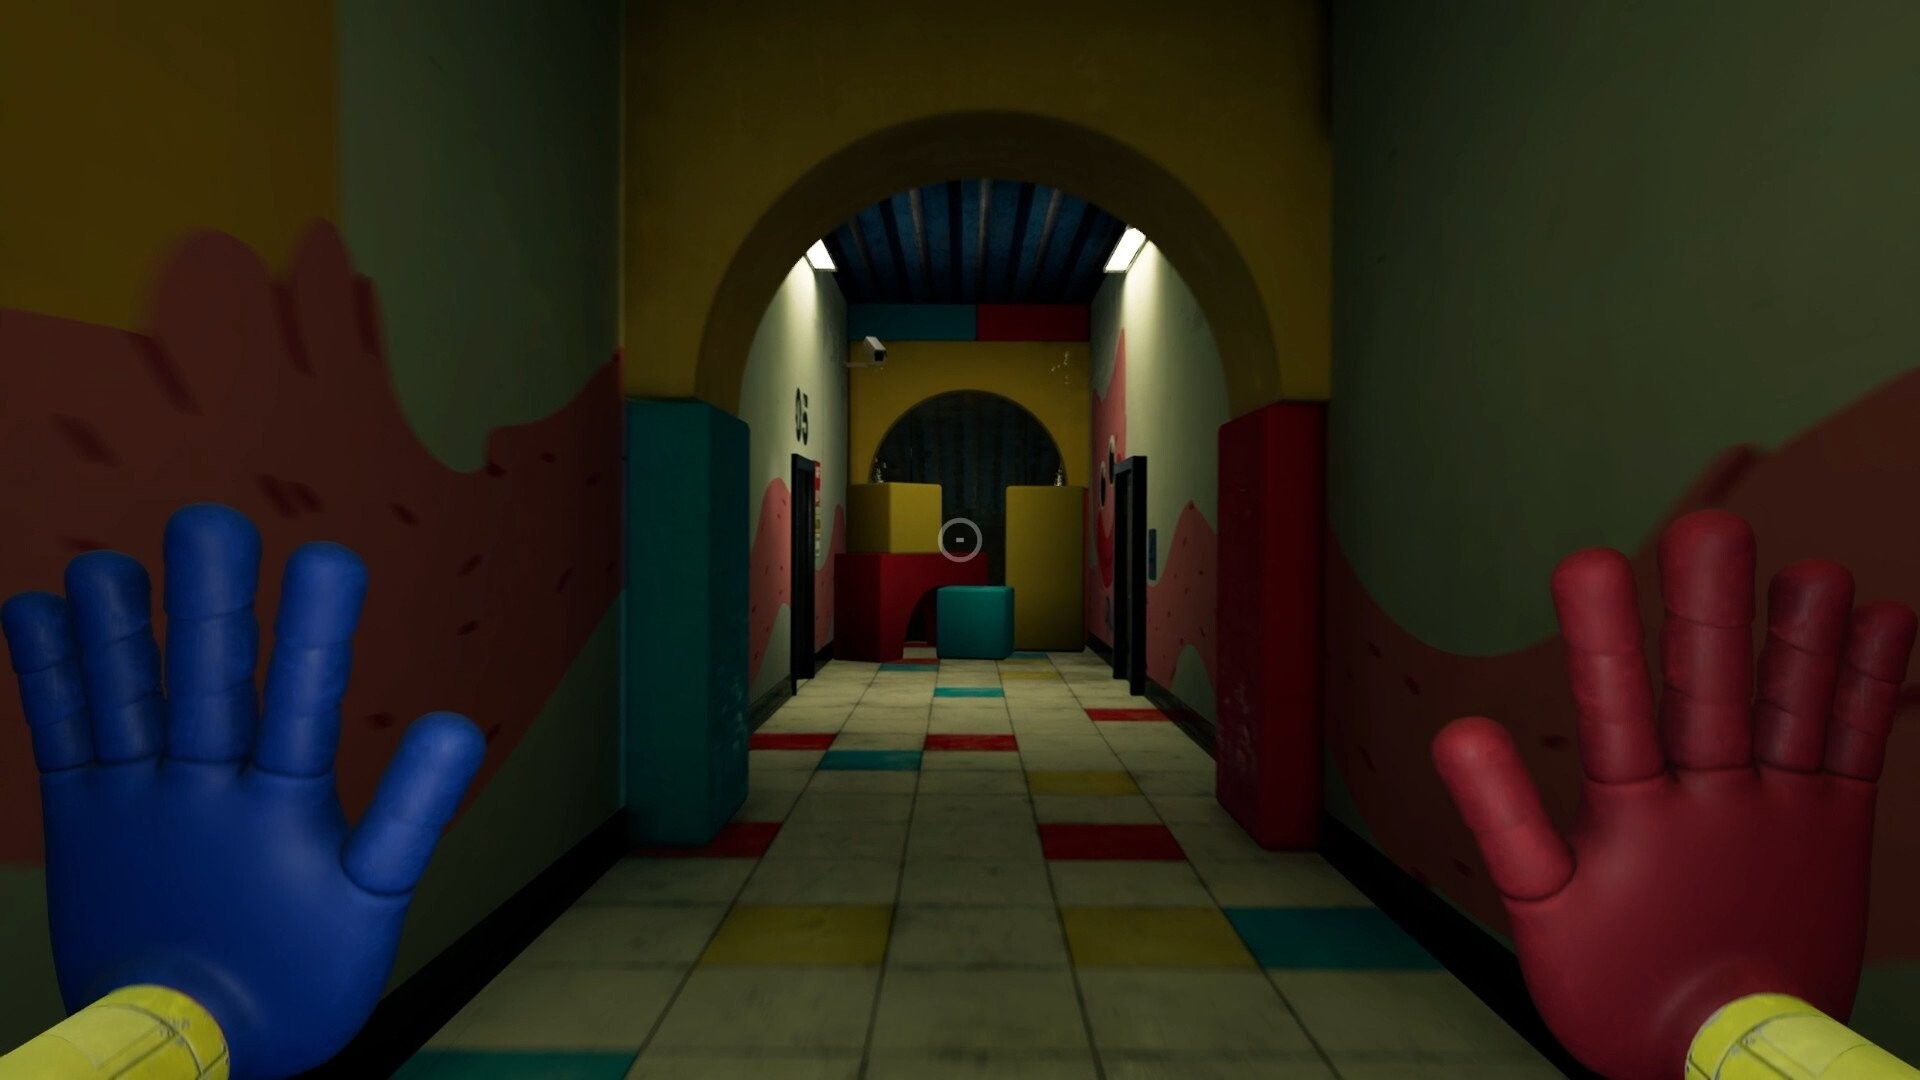 Poppy Playtime: A first-person horror-puzzle adventure game, Developed by MOB Games Studio, Directed by Isaac Christopherson. 1920x1080 Full HD Background.